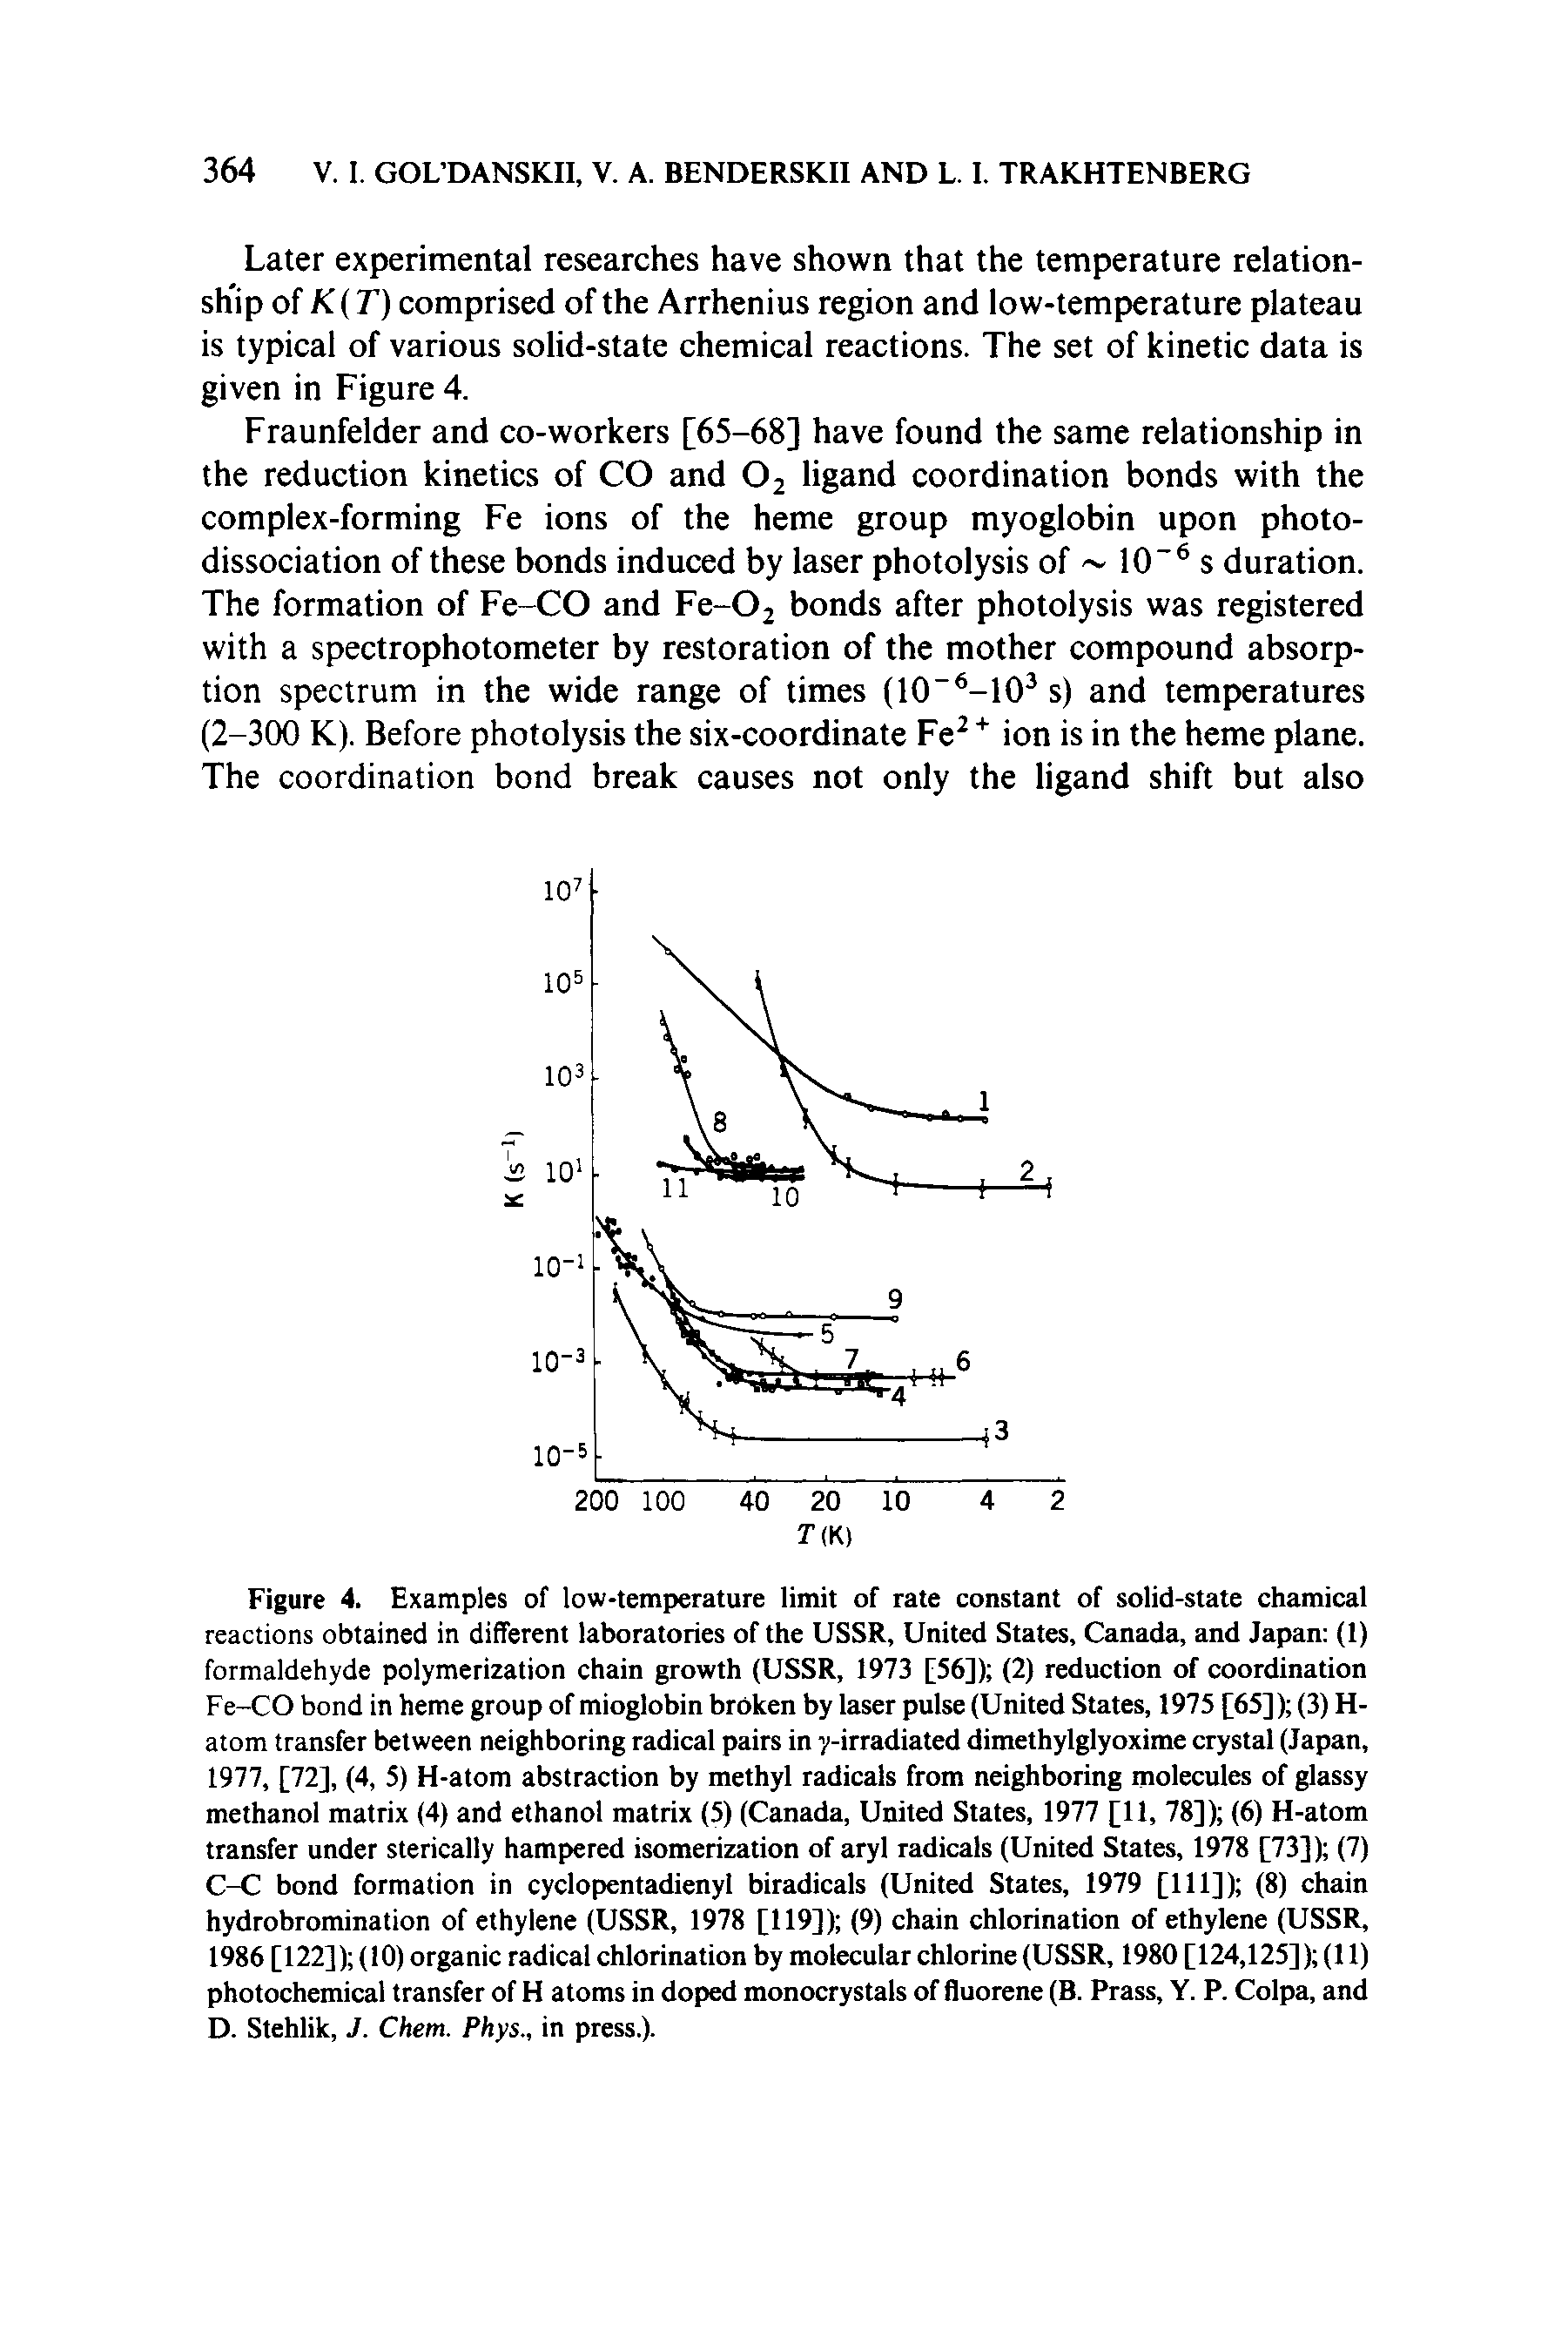 Figure 4. Examples of low-temperature limit of rate constant of solid-state chamical reactions obtained in different laboratories of the USSR, United States, Canada, and Japan (1) formaldehyde polymerization chain growth (USSR, 1973 [56]) (2) reduction of coordination Fe-CO bond in heme group of mioglobin broken by laser pulse (United States, 1975 [65]) (3) H-atom transfer between neighboring radical pairs in y-irradiated dimethylglyoxime crystal (Japan, 1977, [72], (4, 5) H-atom abstraction by methyl radicals from neighboring molecules of glassy methanol matrix (4) and ethanol matrix (5) (Canada, United States, 1977 [11, 78]) (6) H-atom transfer under sterically hampered isomerization of aryl radicals (United States, 1978 [73]) (7) C-C bond formation in cyclopentadienyl biradicals (United States, 1979 [111]) (8) chain hydrobromination of ethylene (USSR, 1978 [119]) (9) chain chlorination of ethylene (USSR, 1986 [122]) (10) organic radical chlorination by molecular chlorine (USSR, 1980 [124,125]) (11) photochemical transfer of H atoms in doped monocrystals of fluorene (B. Prass, Y. P. Colpa, and D. Stehlik, J. Chem. Phys., in press.).